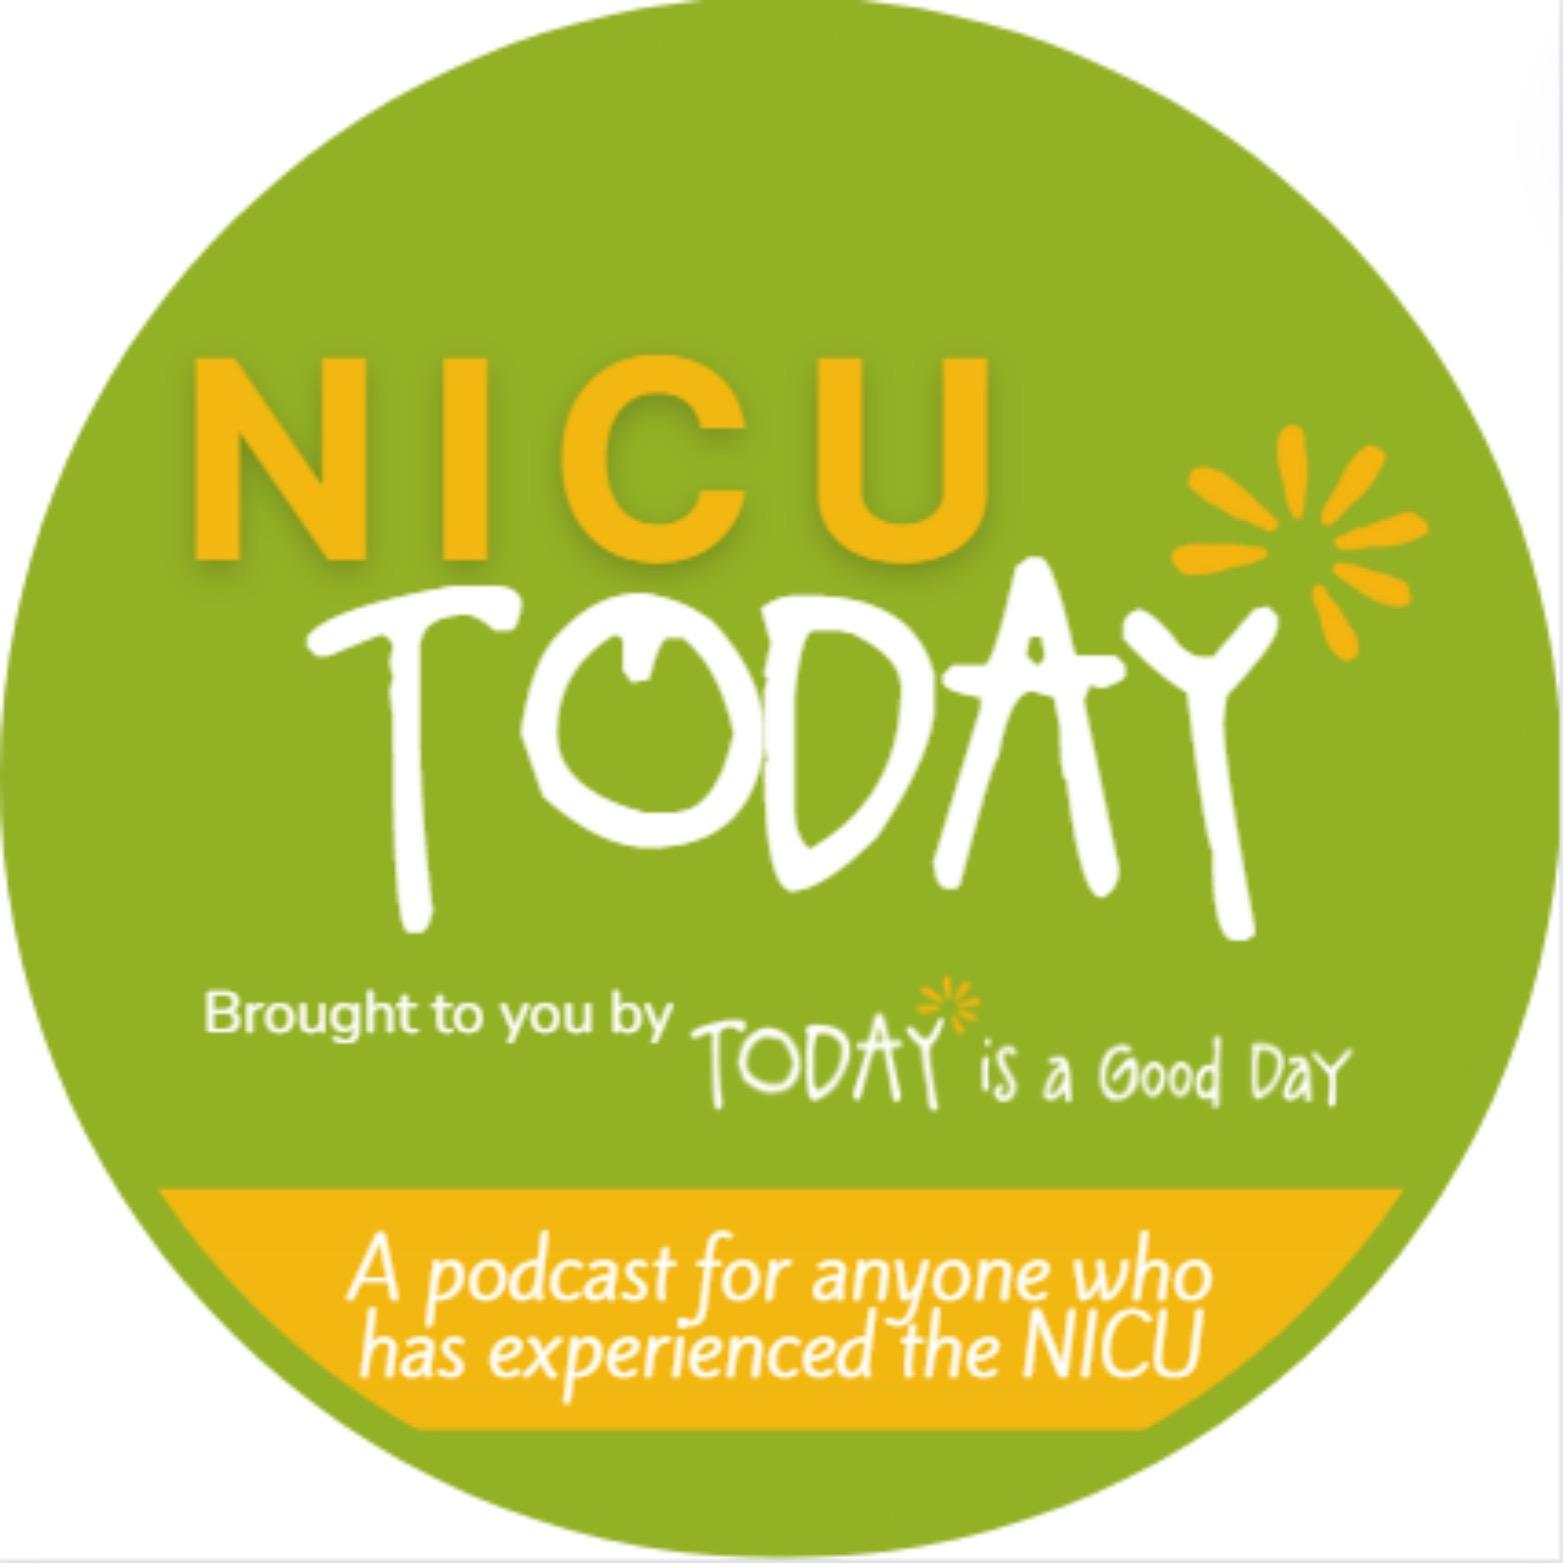 NICU Today: A podcast by Today is a Good Day